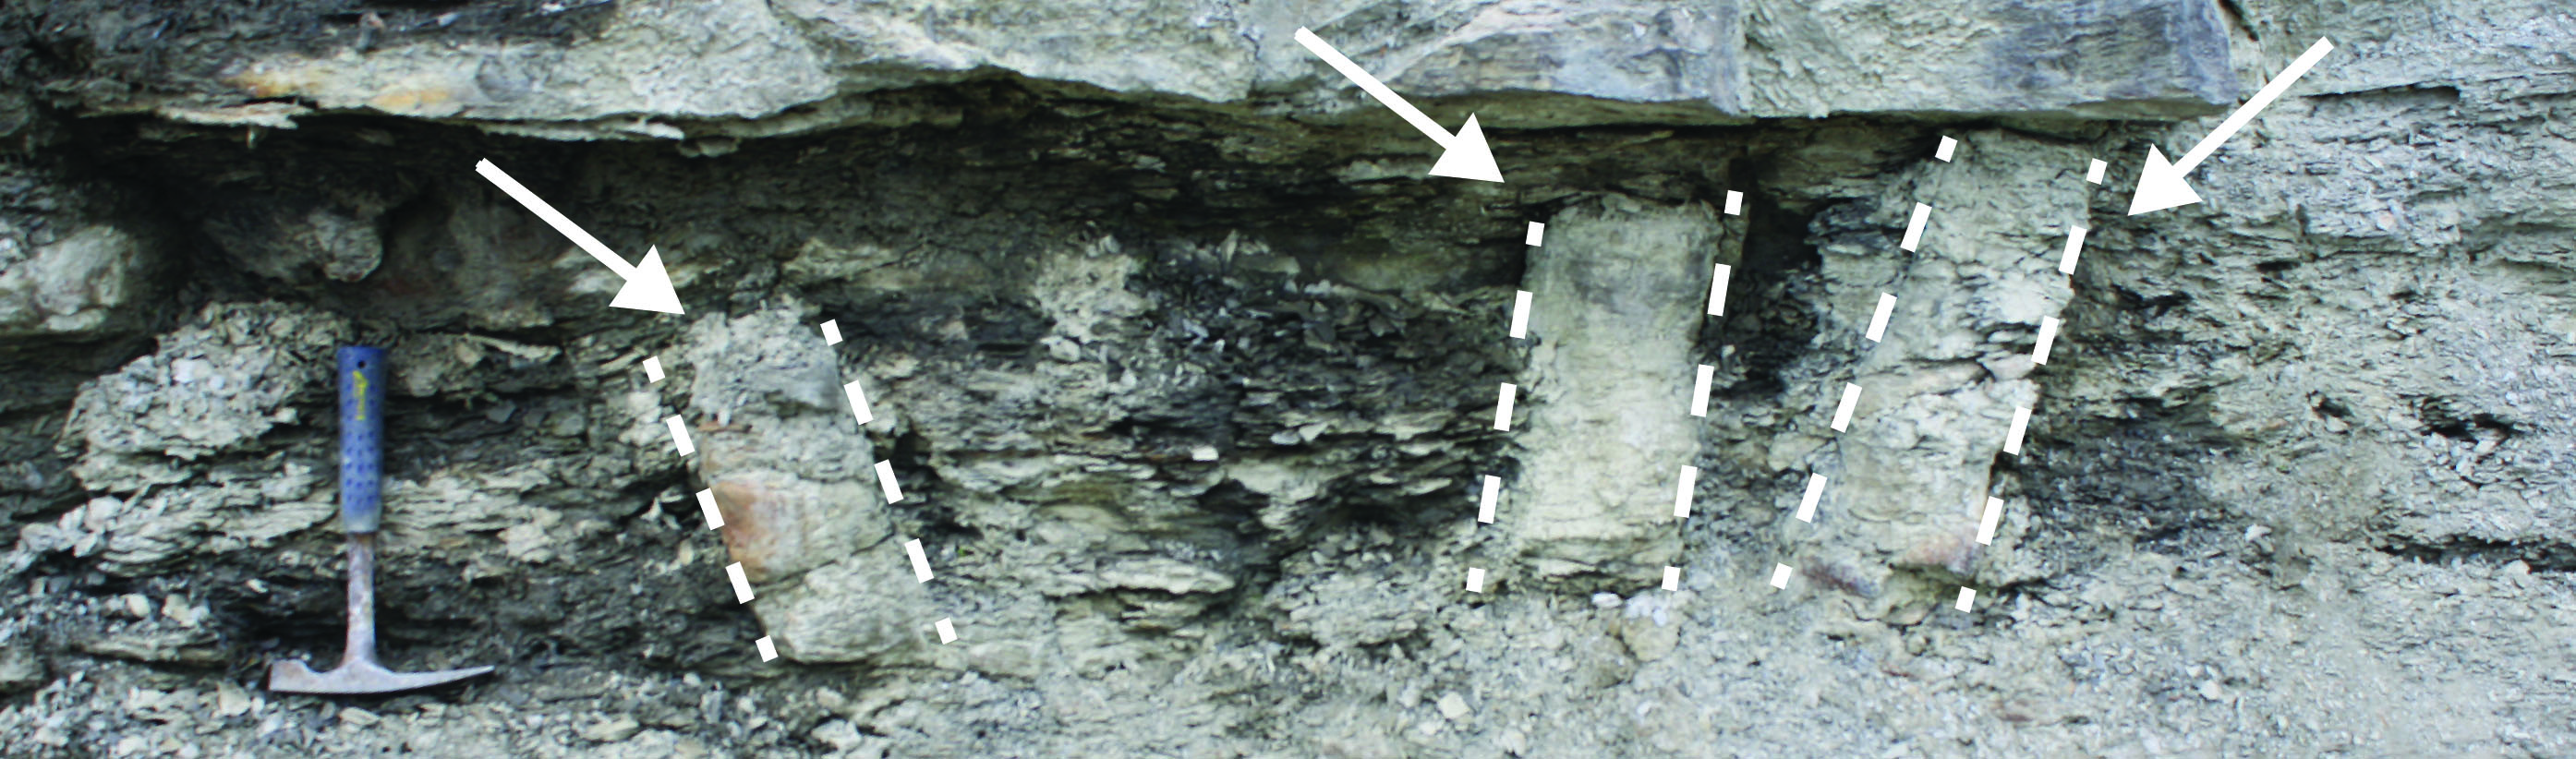 Standing, in place, fossil Calamites trunks in the Eastern Kentucky Coal Field. Hammer for scale. These Calamites were buried in muddy flood sediments from an ancient river.